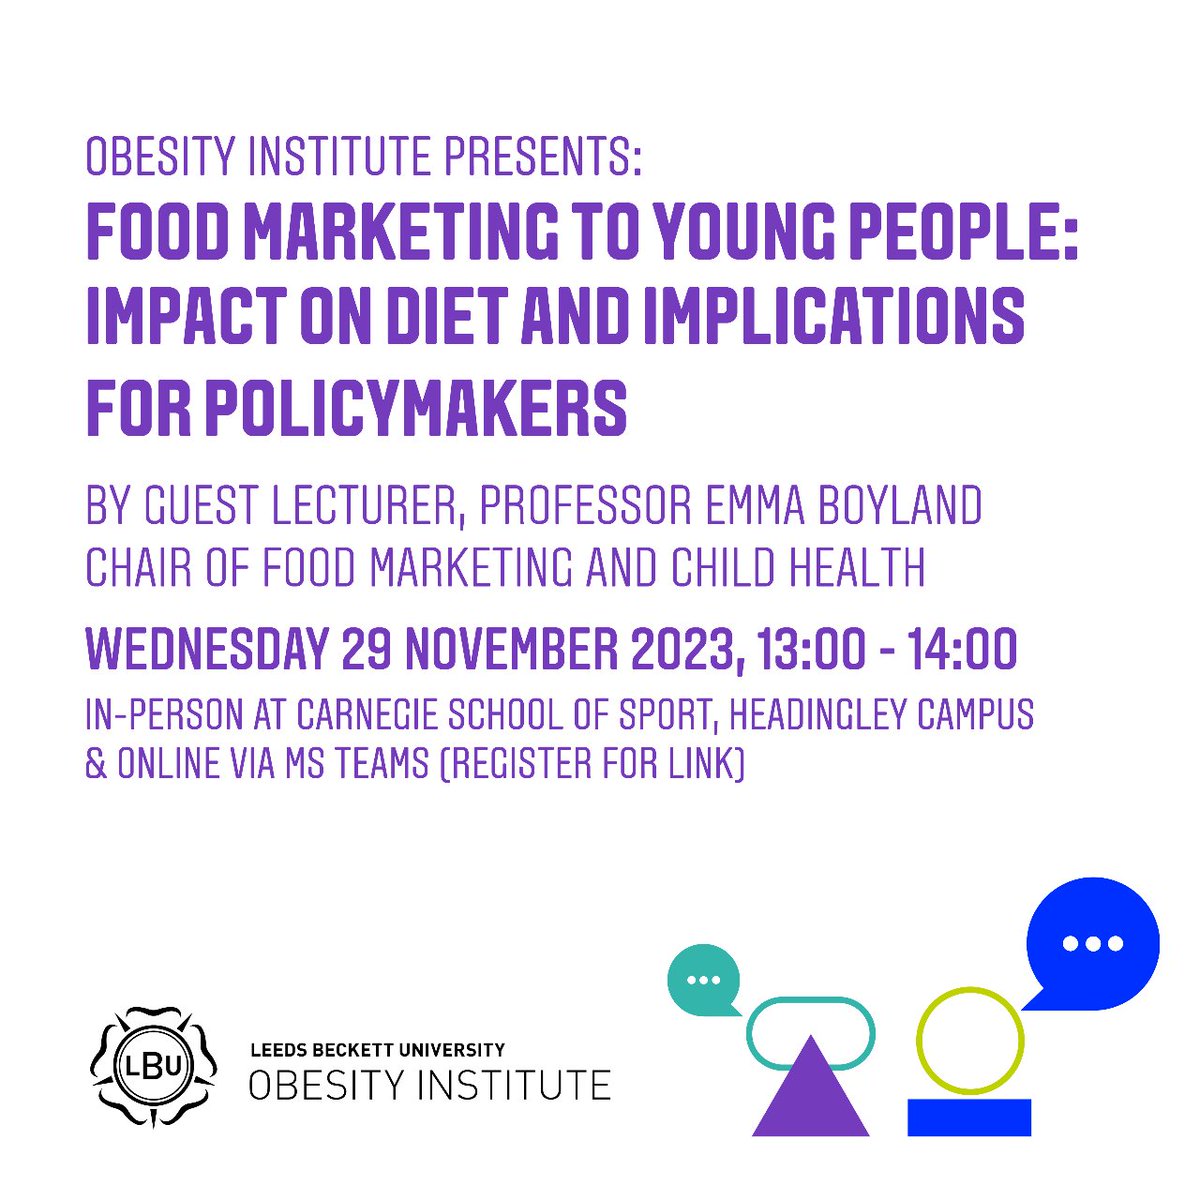 Join us in-person for our next seminar, 'Food marketing to young people: impact on diet & implications for policymakers' By Guest Speaker @emmaboyland, on Wednesday 29 November. You can find out more & register here: bit.ly/49j6x0K #FoodMarketing #LBUObesityInstitute